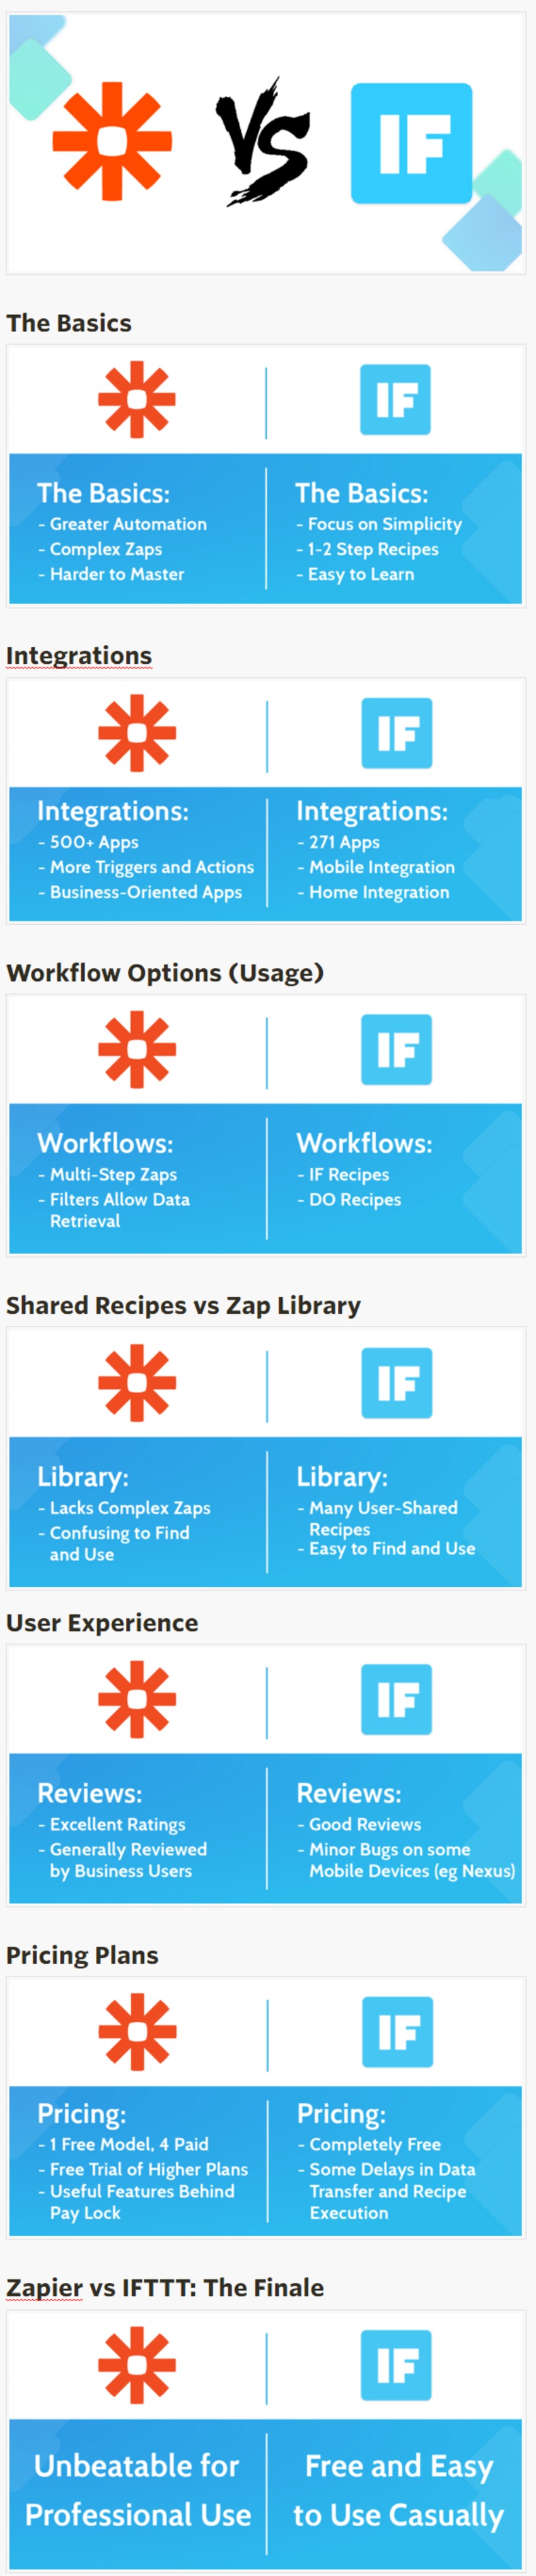 Zapier vs IFTTT: The Best Way to Automate Your Life? - process.st | The MarTech Digest | Scoop.it